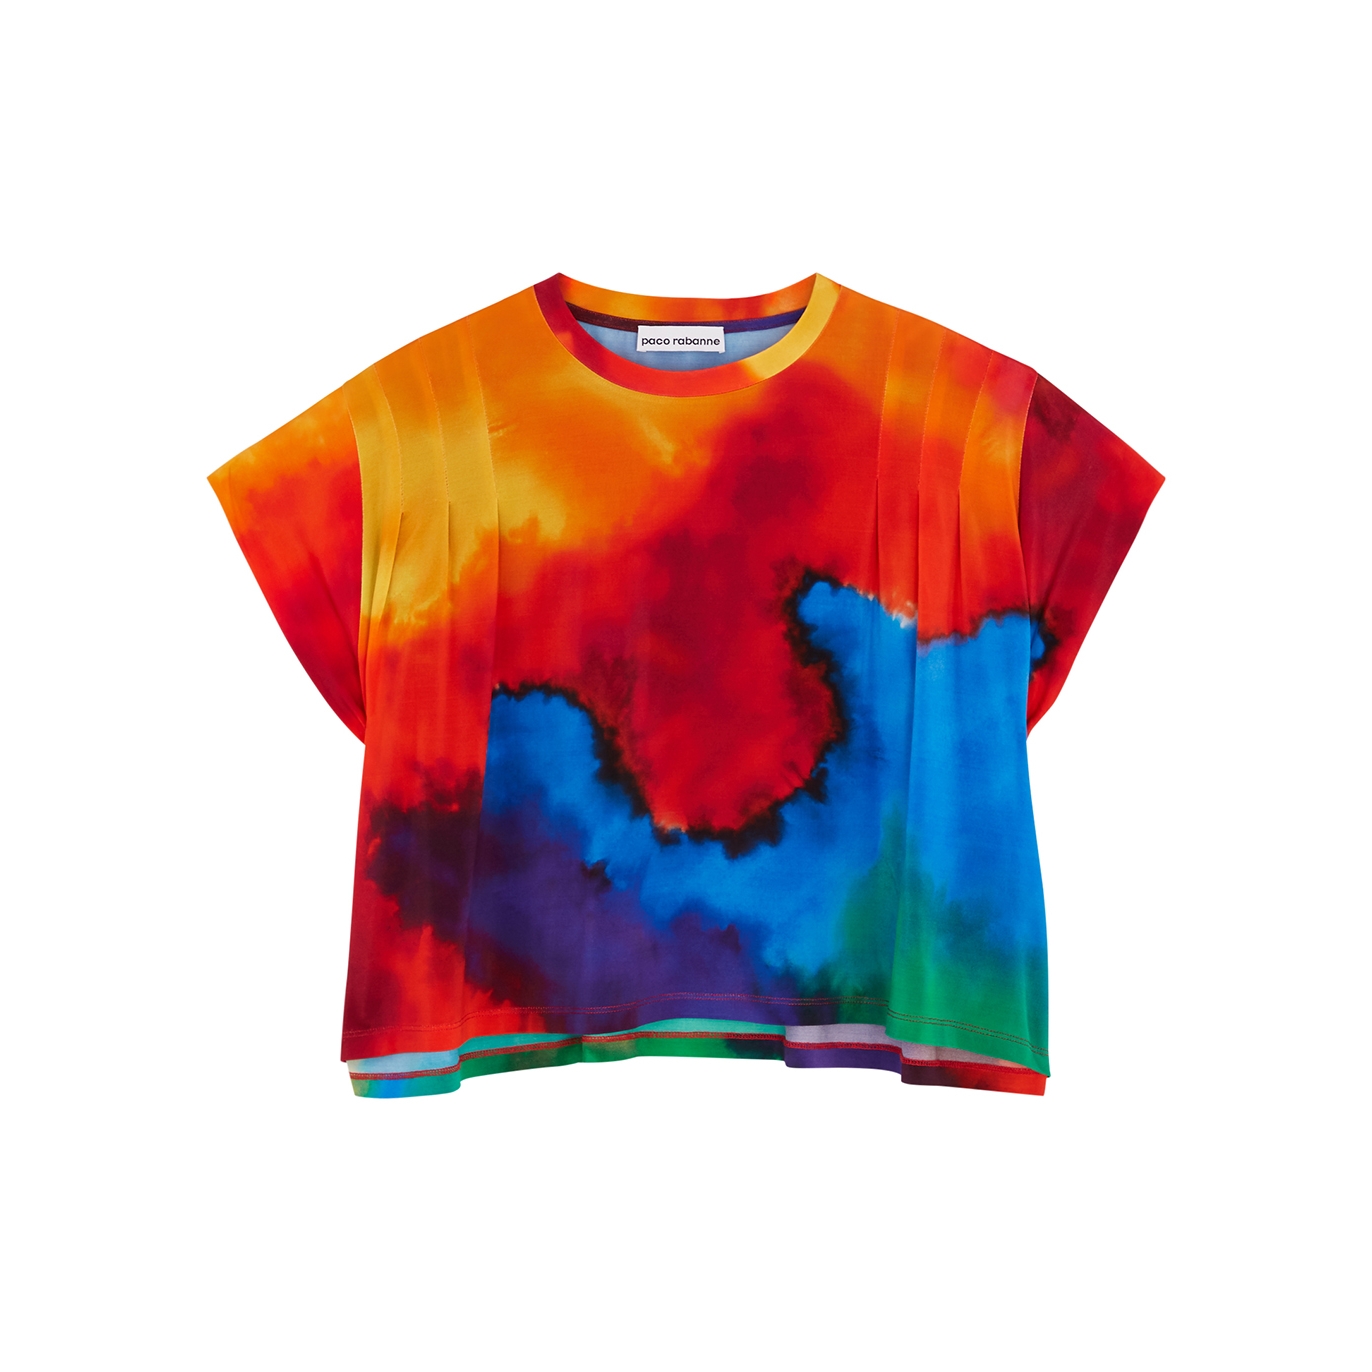 Paco Rabanne Printed Cropped Stretch-jersey T-shirt - Multicoloured - M